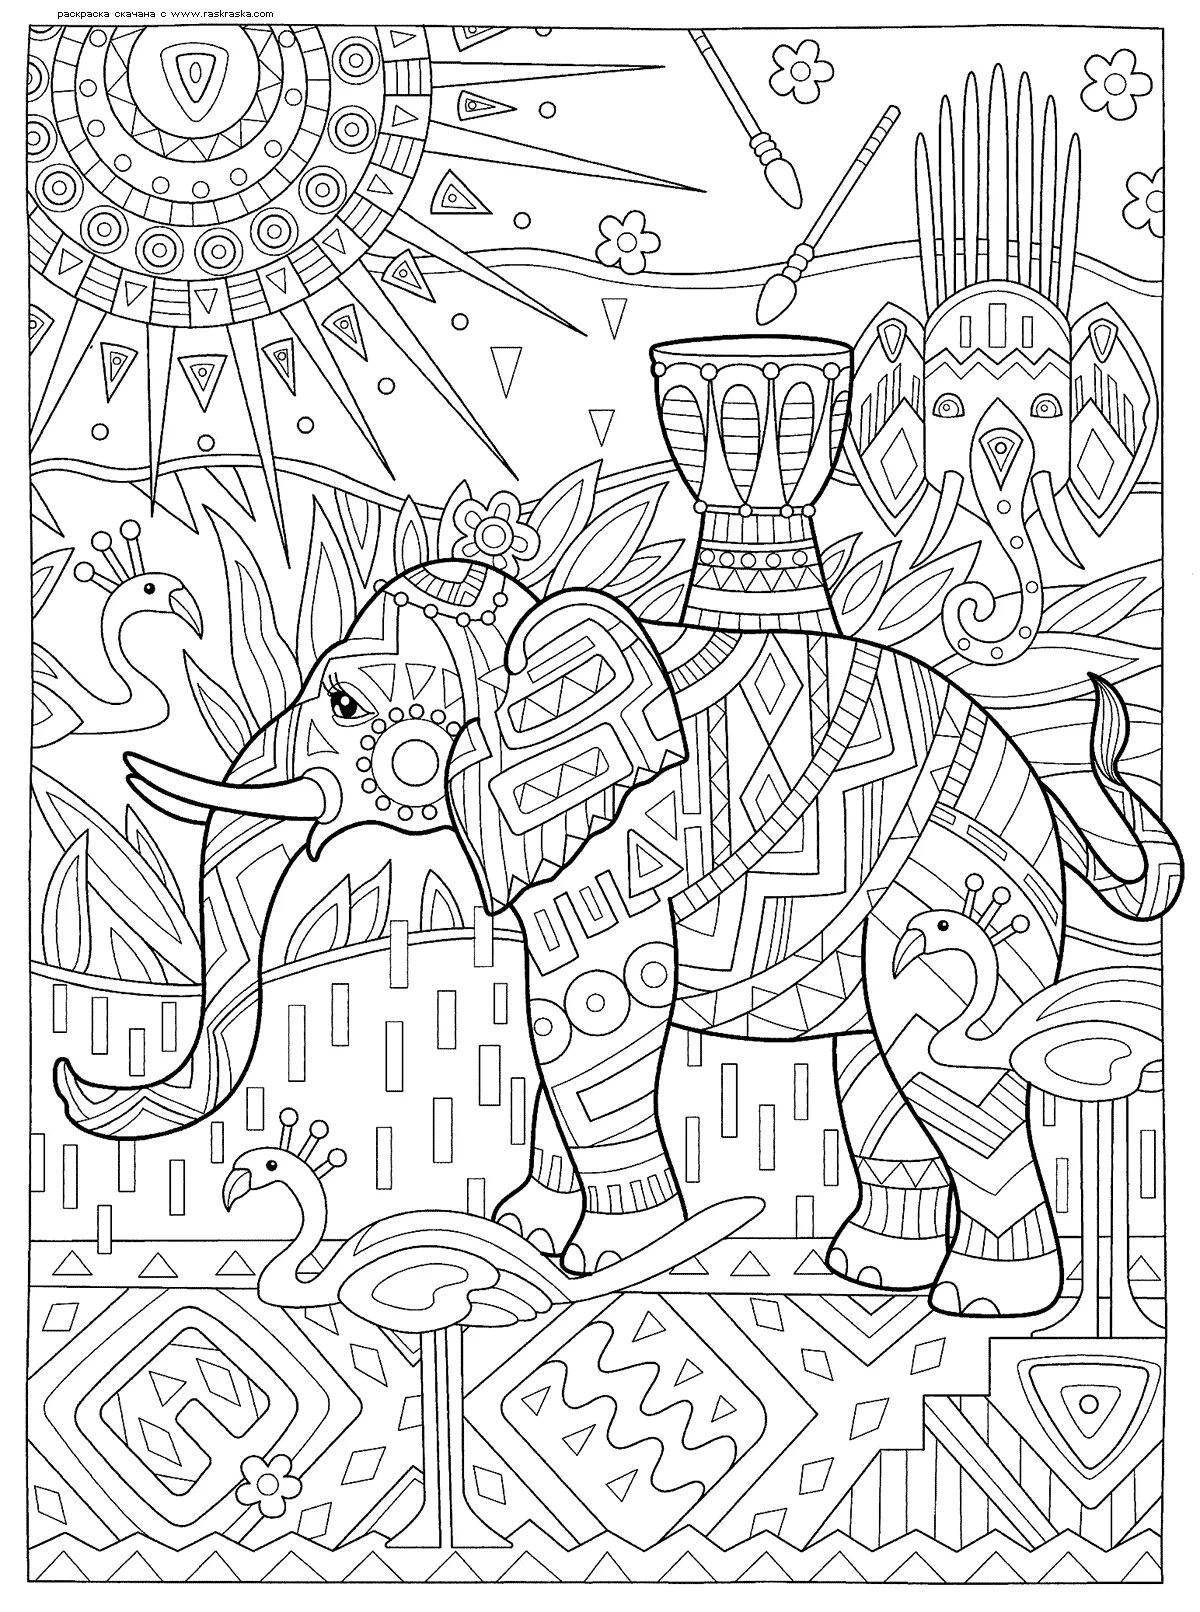 Amazing elephant coloring by numbers